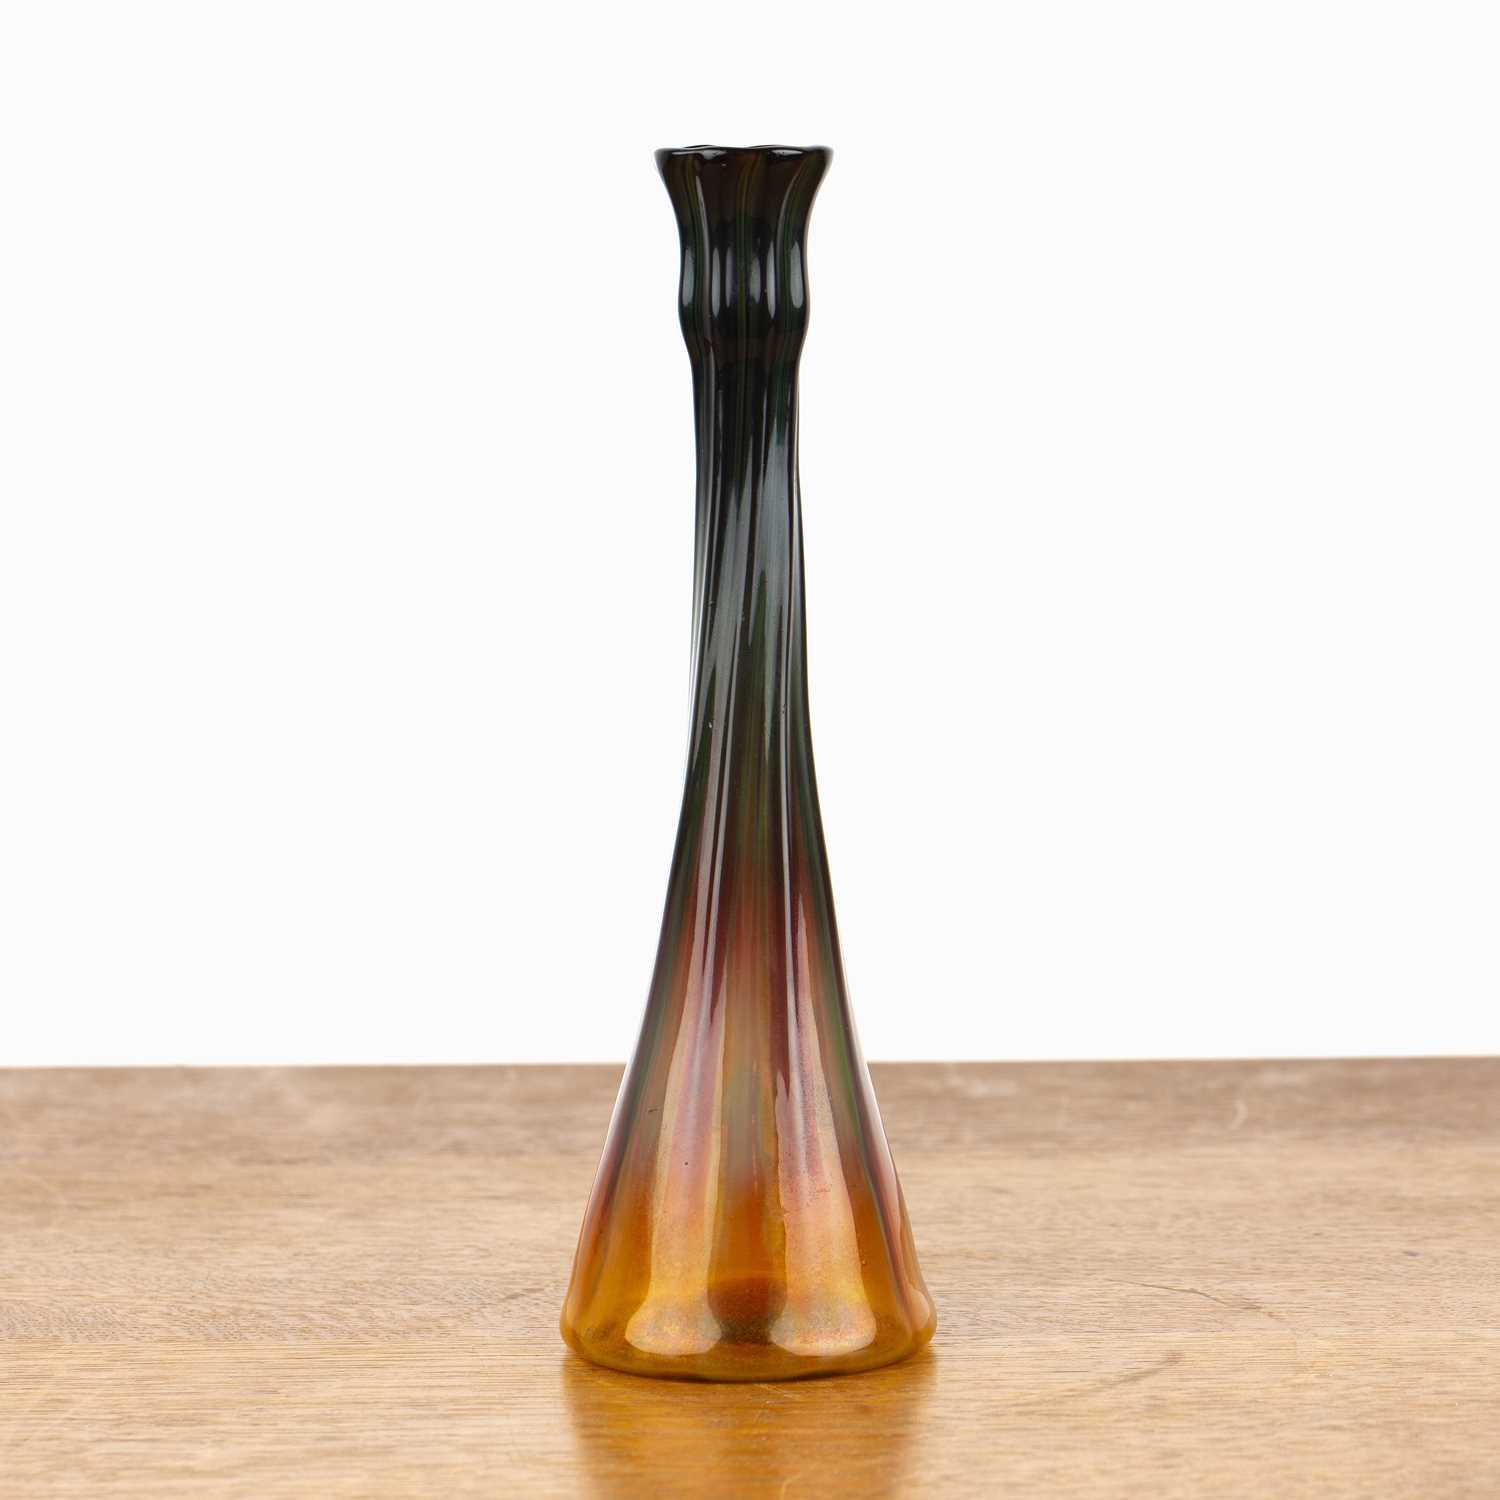 Louis Comfort Tiffany (1848-1933) glass vase, signed and numbered 'L. C. T K1562' to the base,